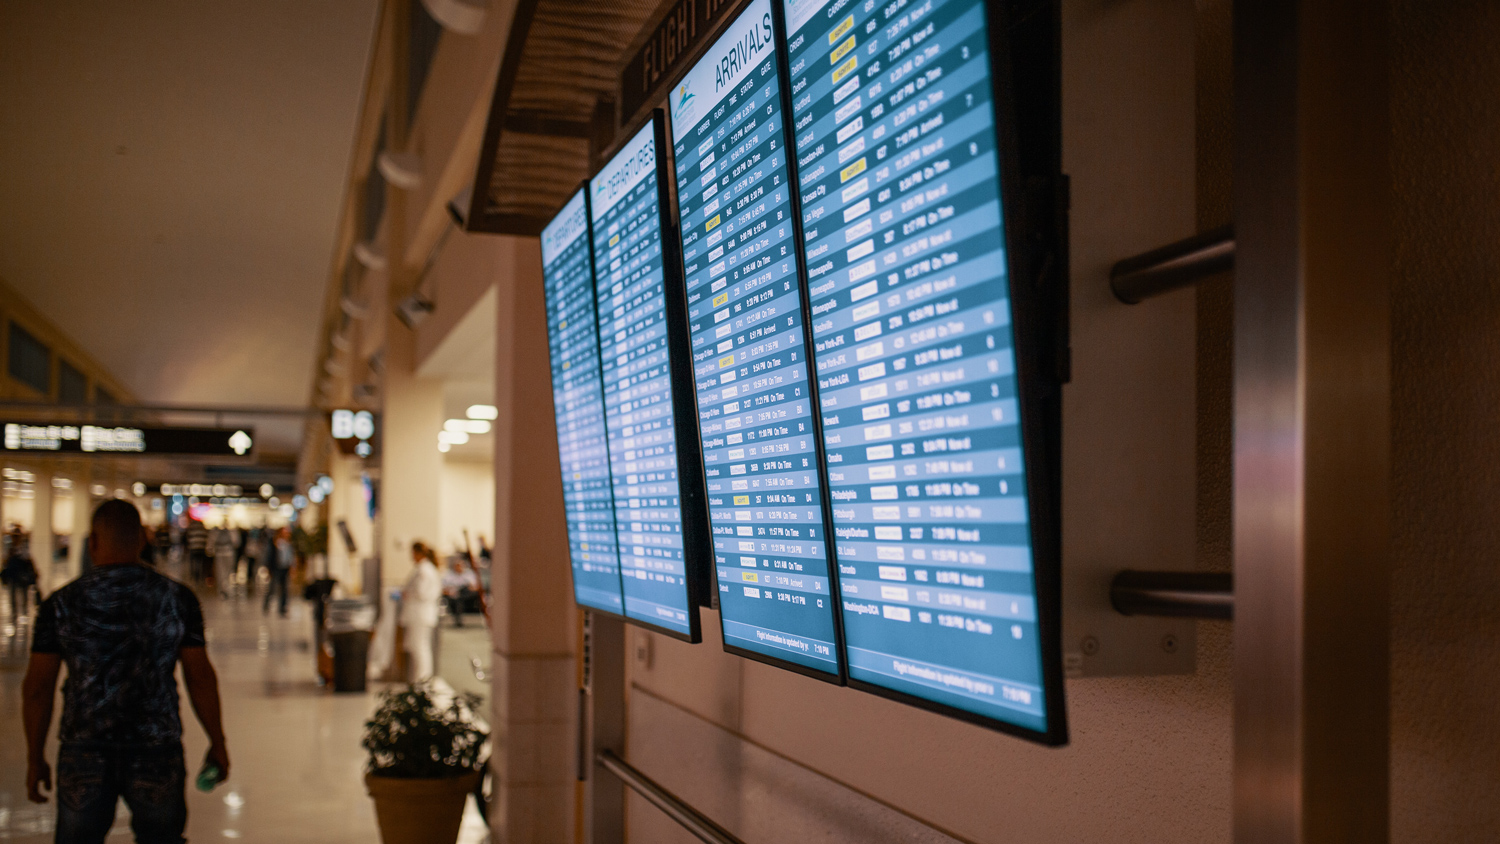 Information screens at an airport